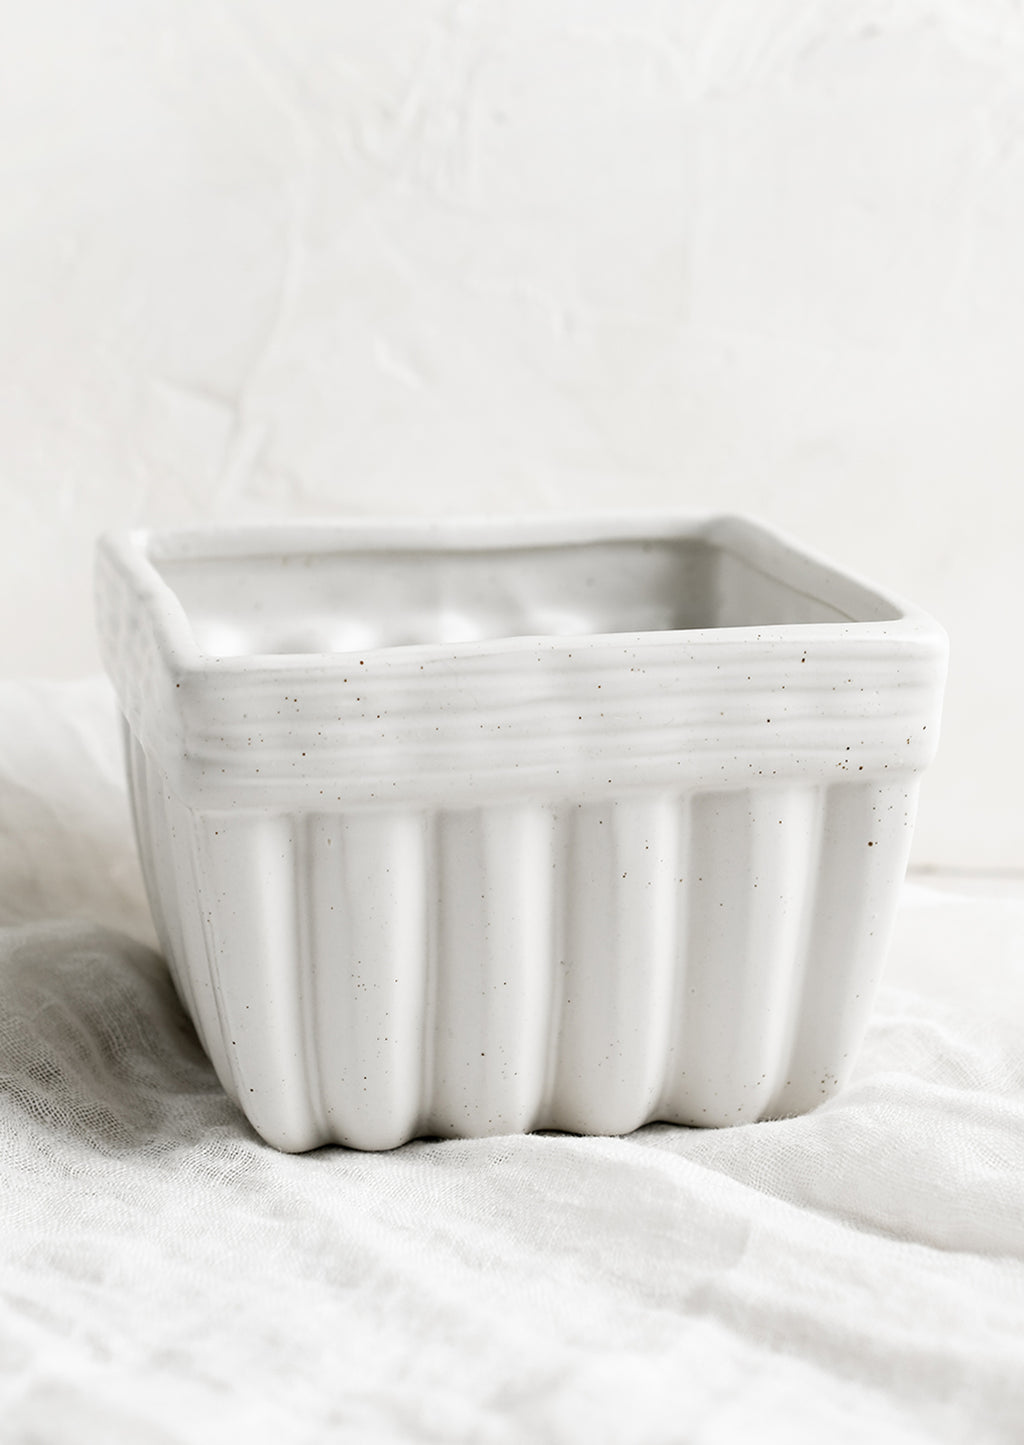 Square: A square ceramic container in the shape of a disposable produce basket.